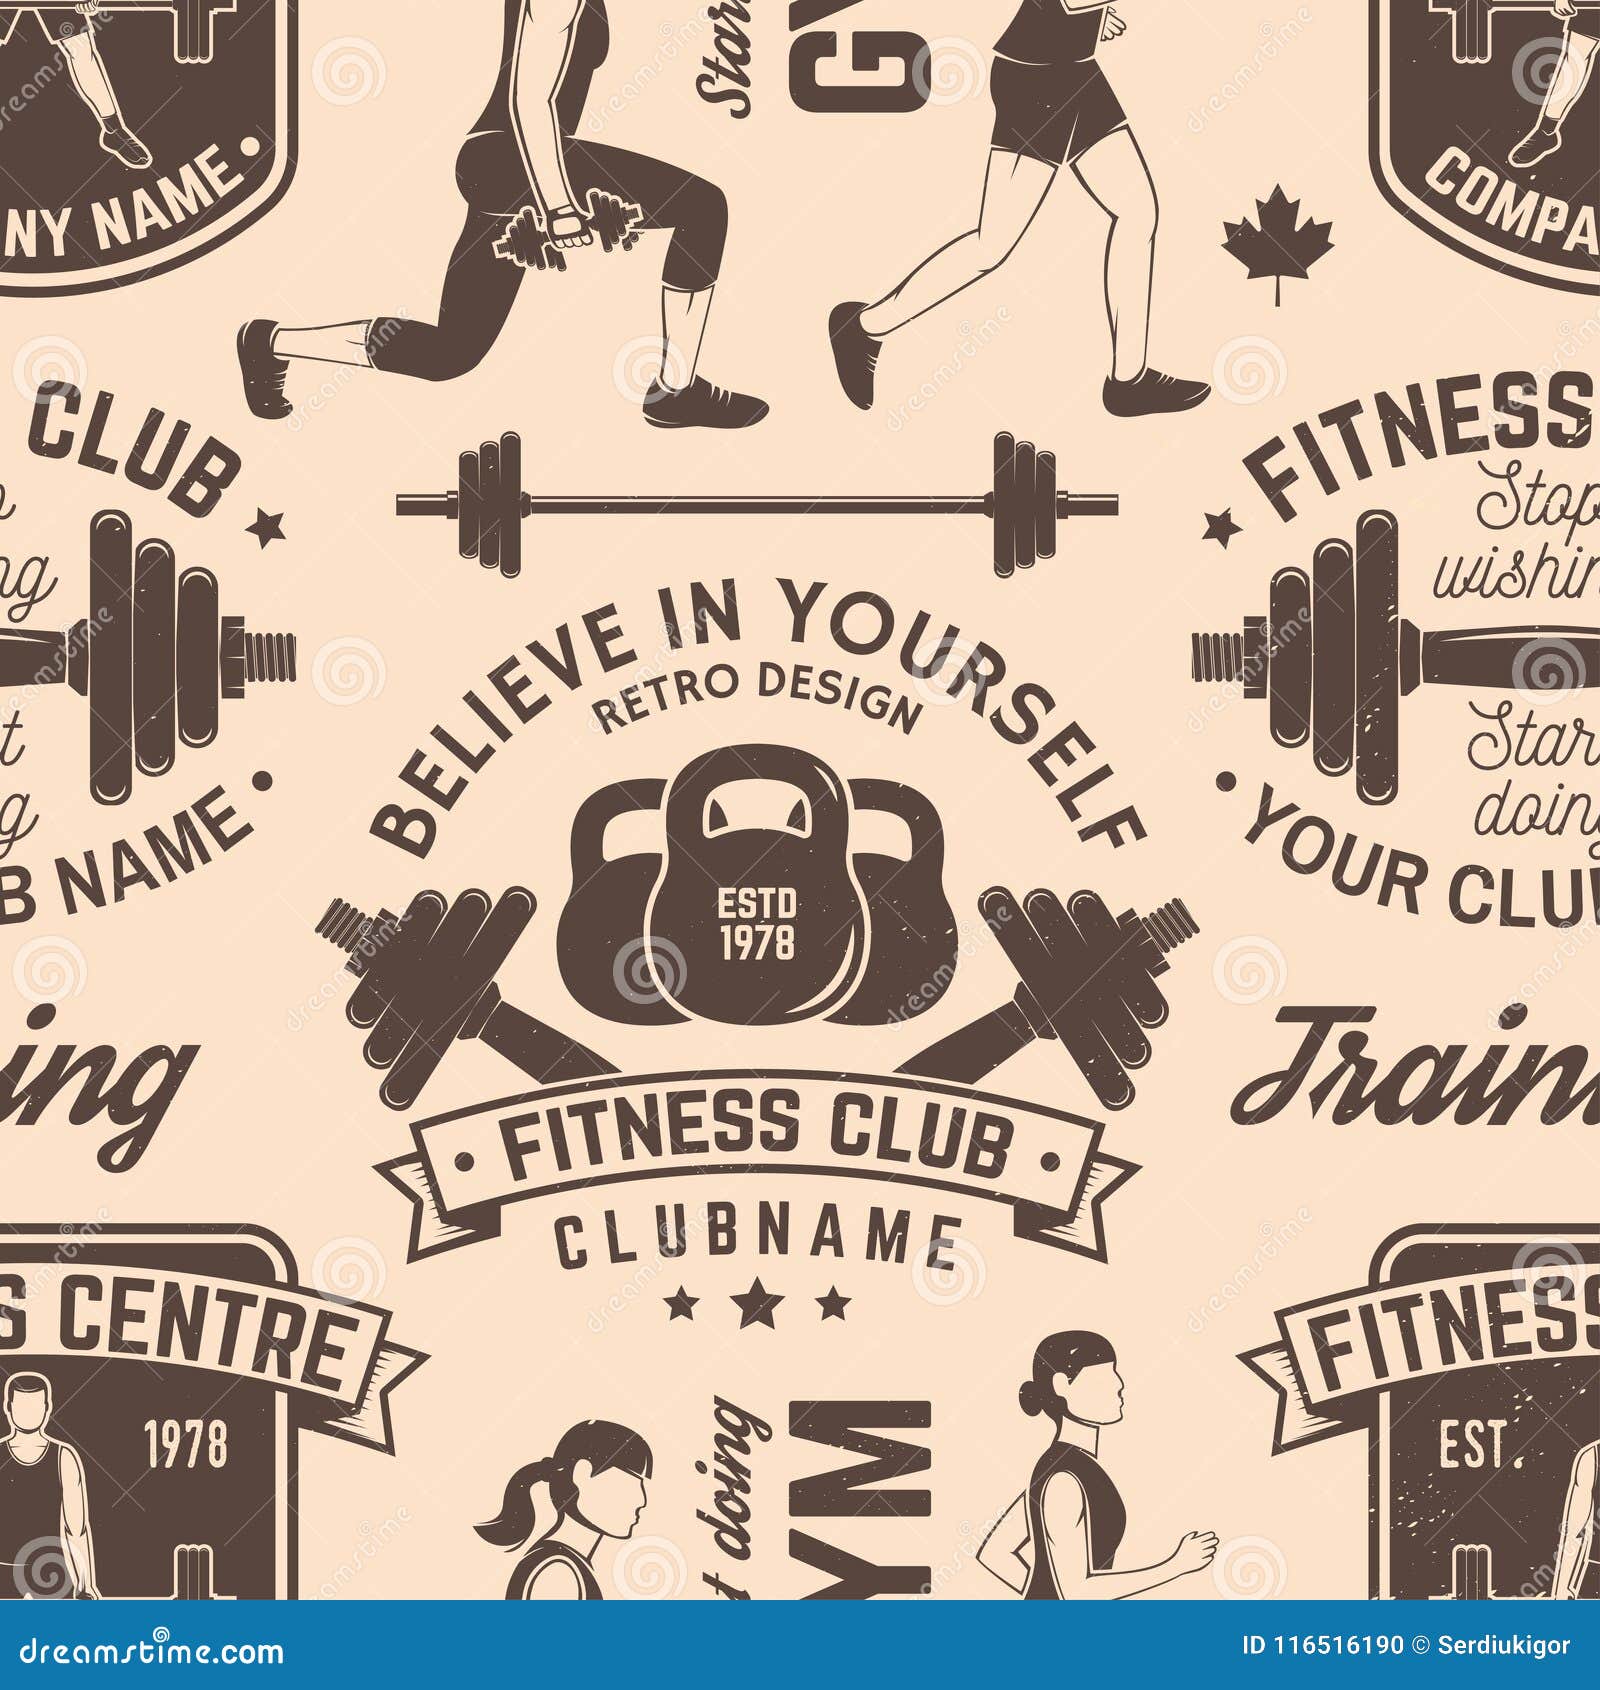 8,165 Gym Wallpapers Graphics Images, Stock Photos & Vectors | Shutterstock